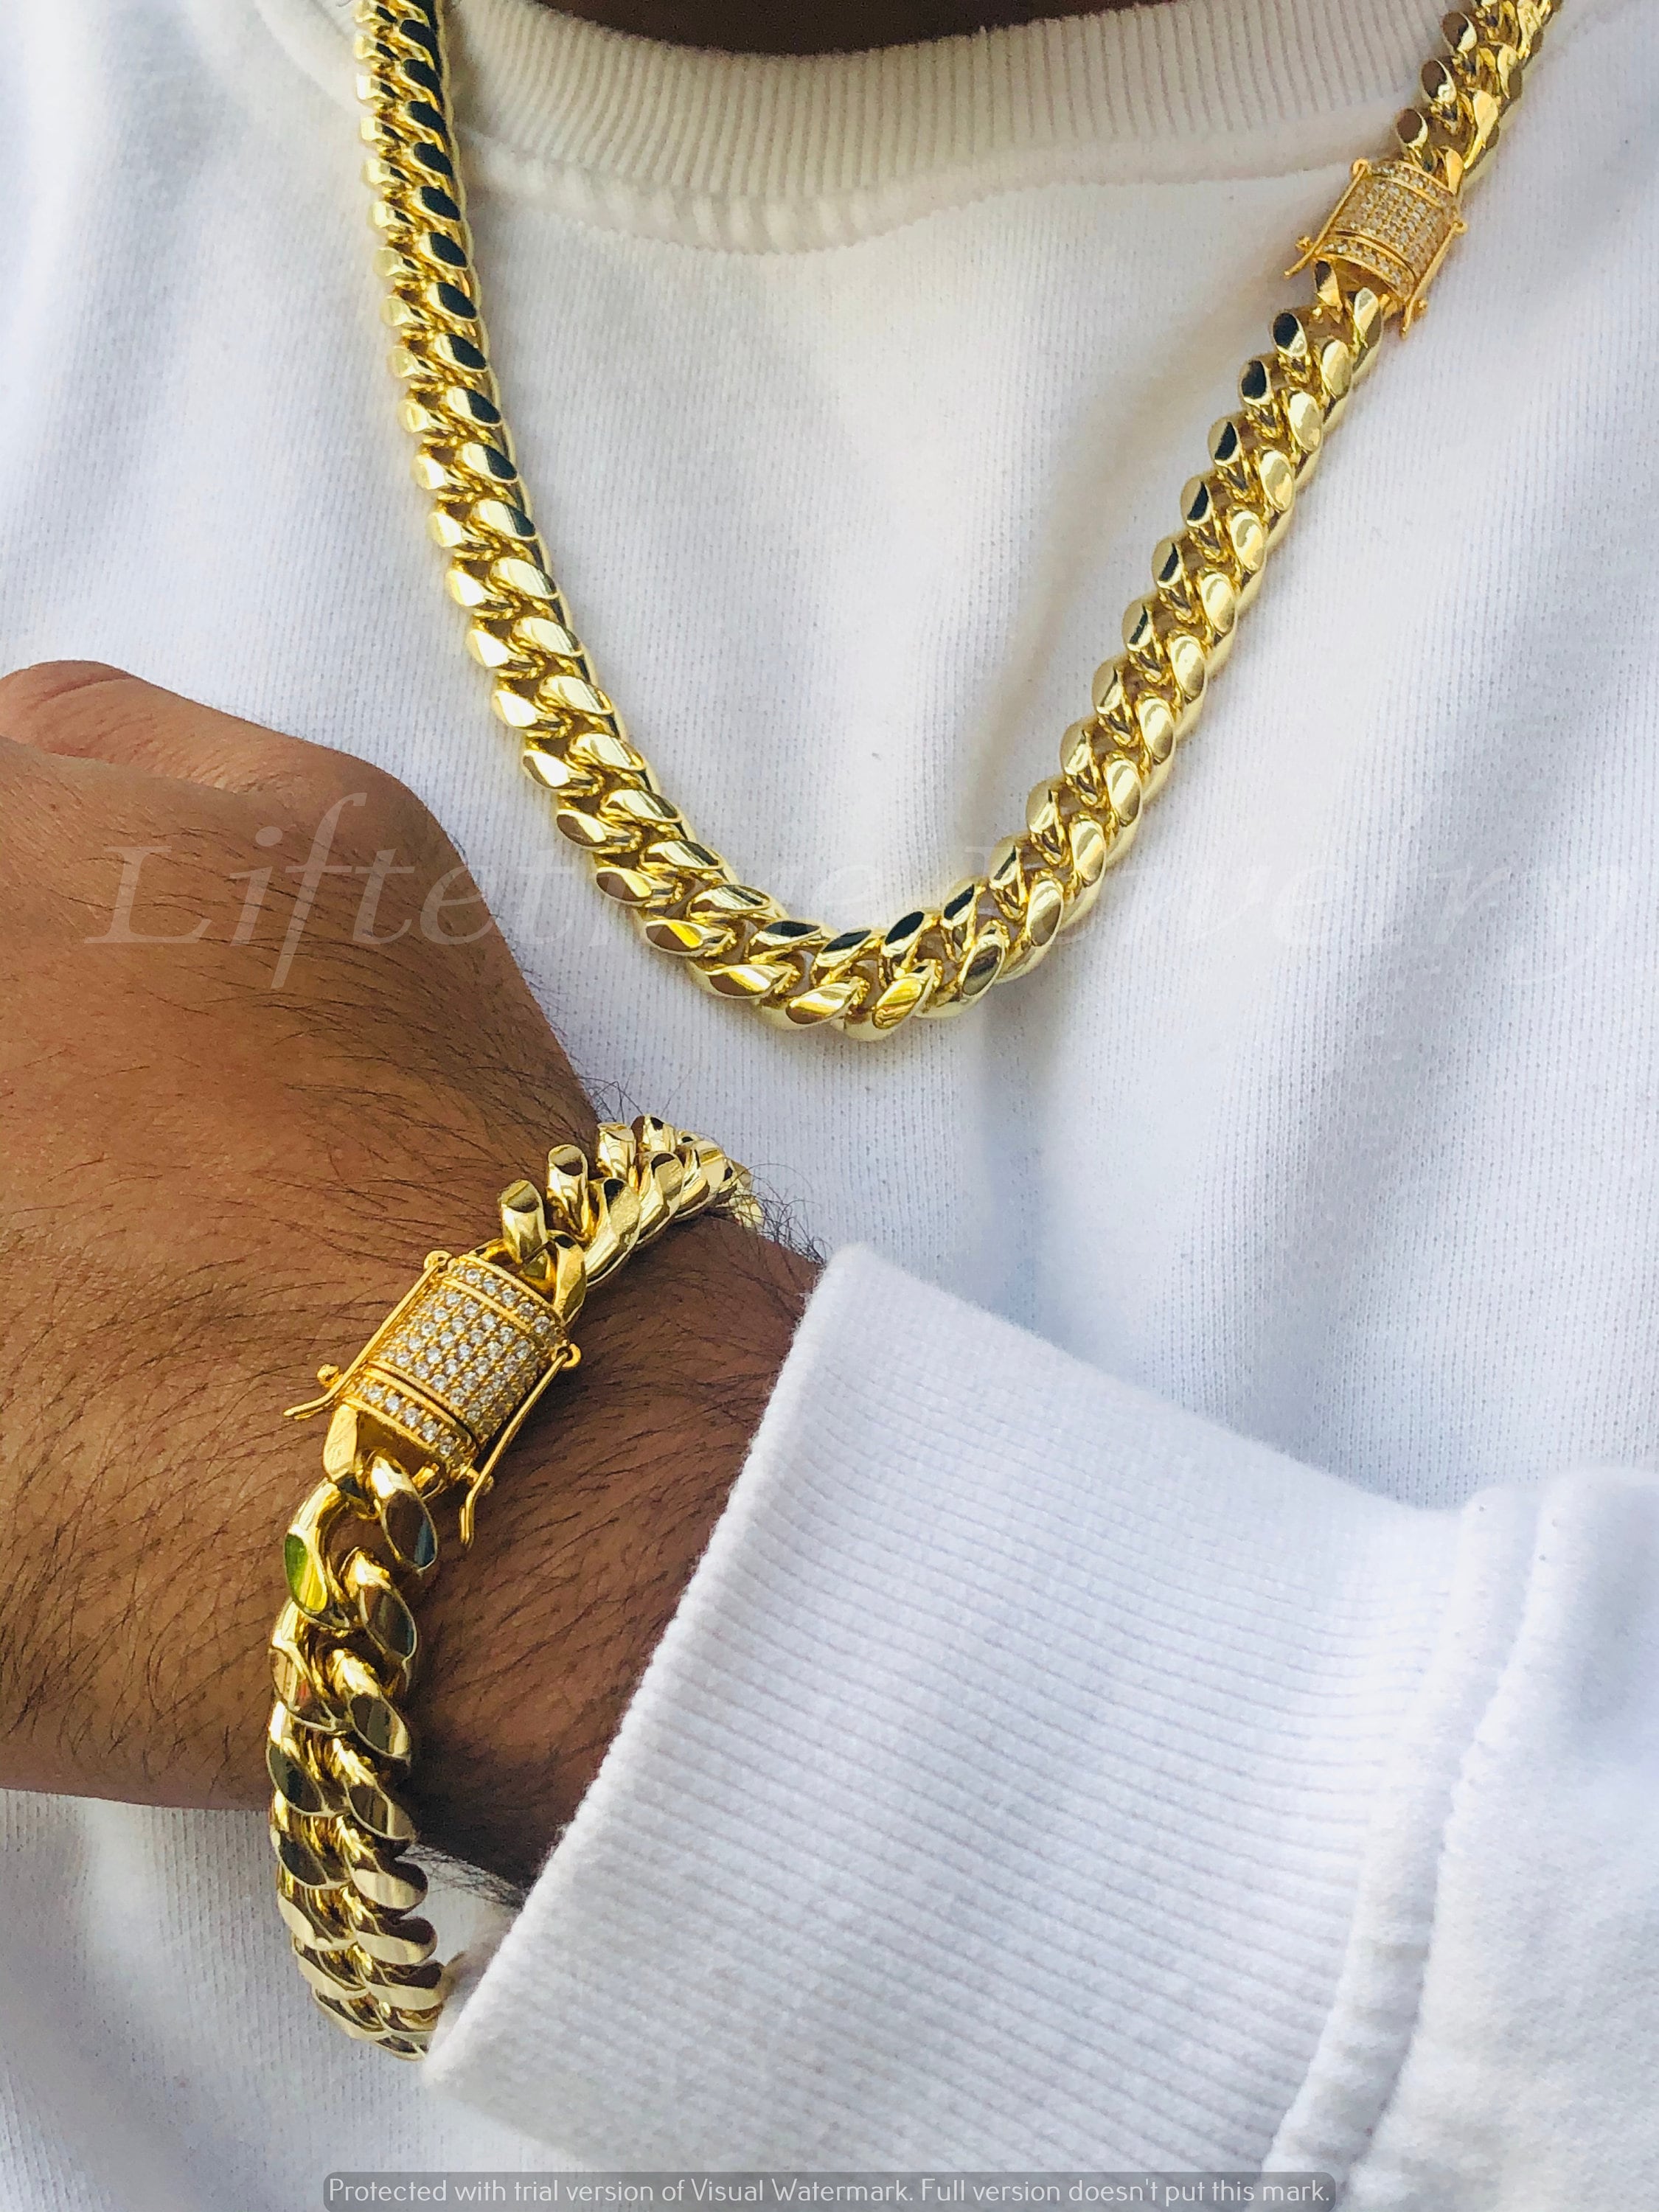 24 14K Diamond Cut Cuban Chain Necklace 9MM Miami Link With Warranty of a LifeTime USA Made!